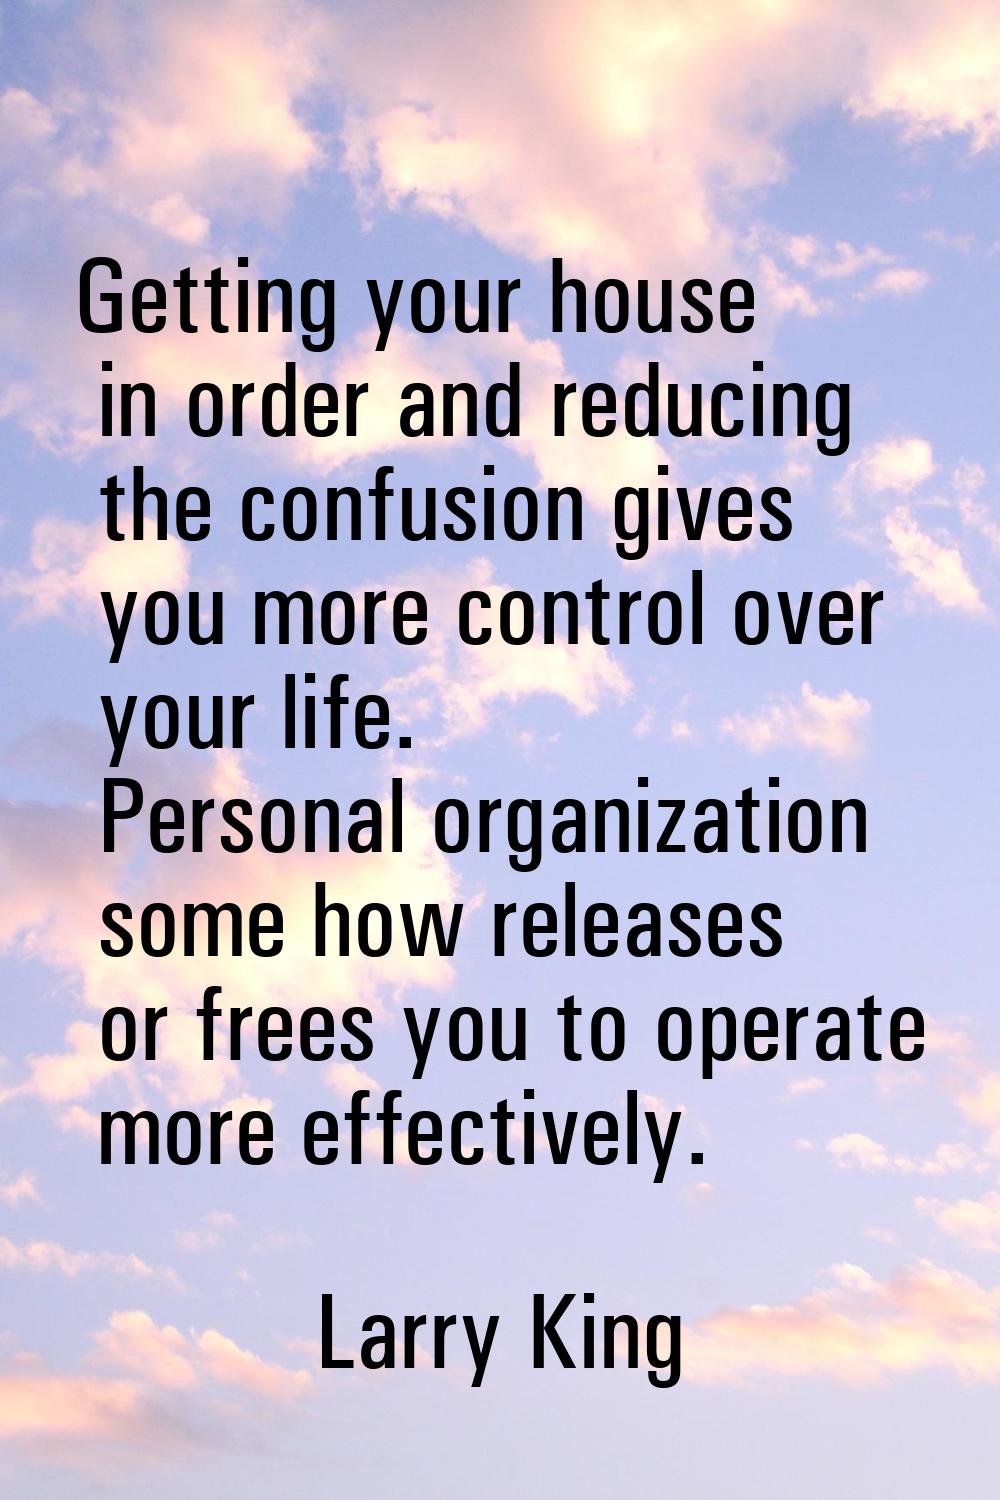 Getting your house in order and reducing the confusion gives you more control over your life. Perso